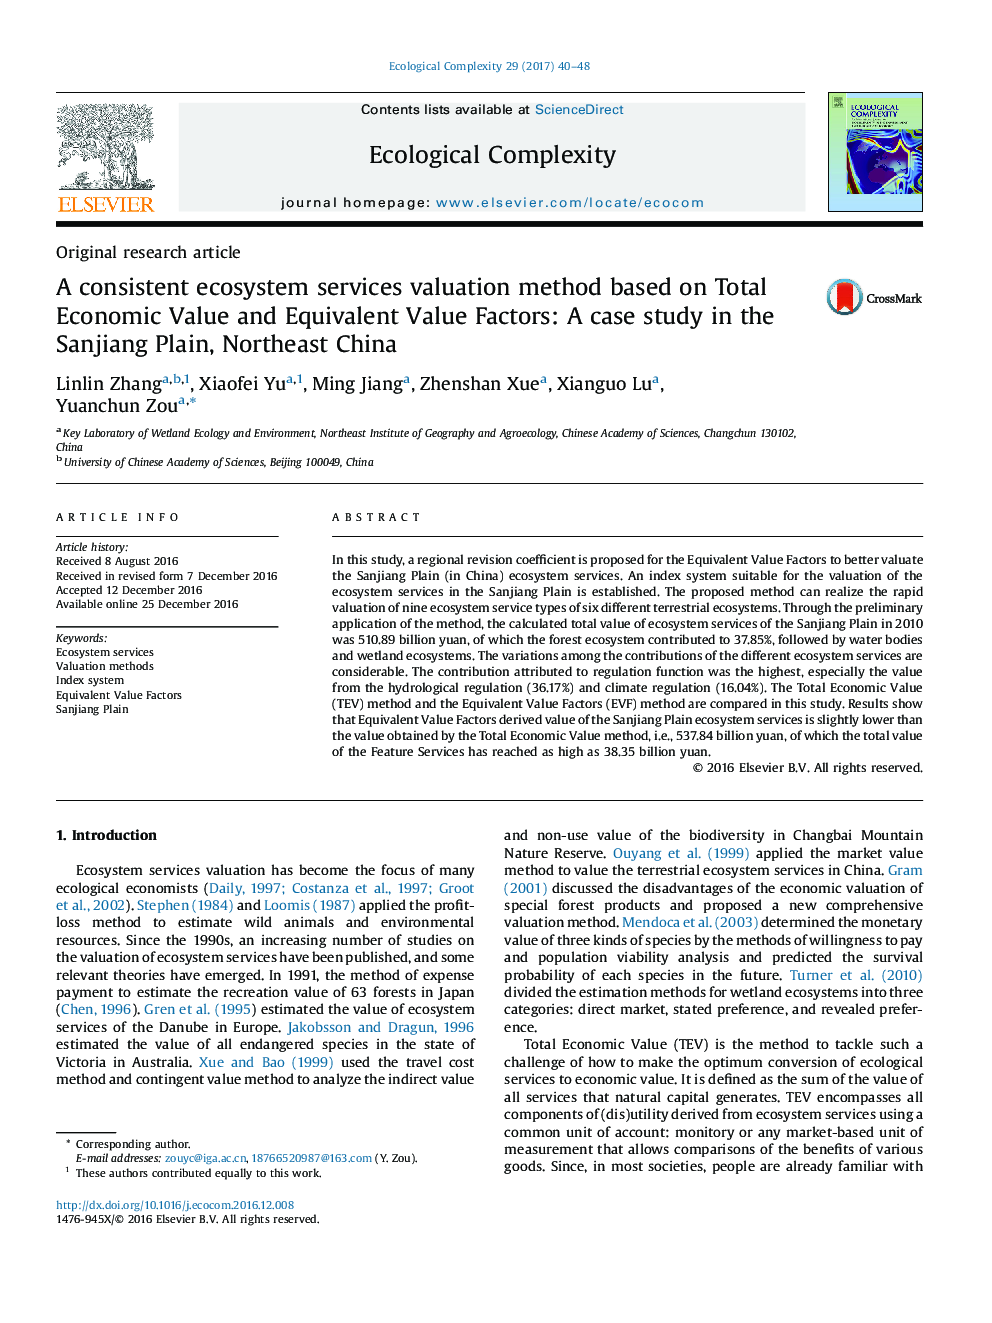 Original research articleA consistent ecosystem services valuation method based on Total Economic Value and Equivalent Value Factors: A case study in the Sanjiang Plain, Northeast China